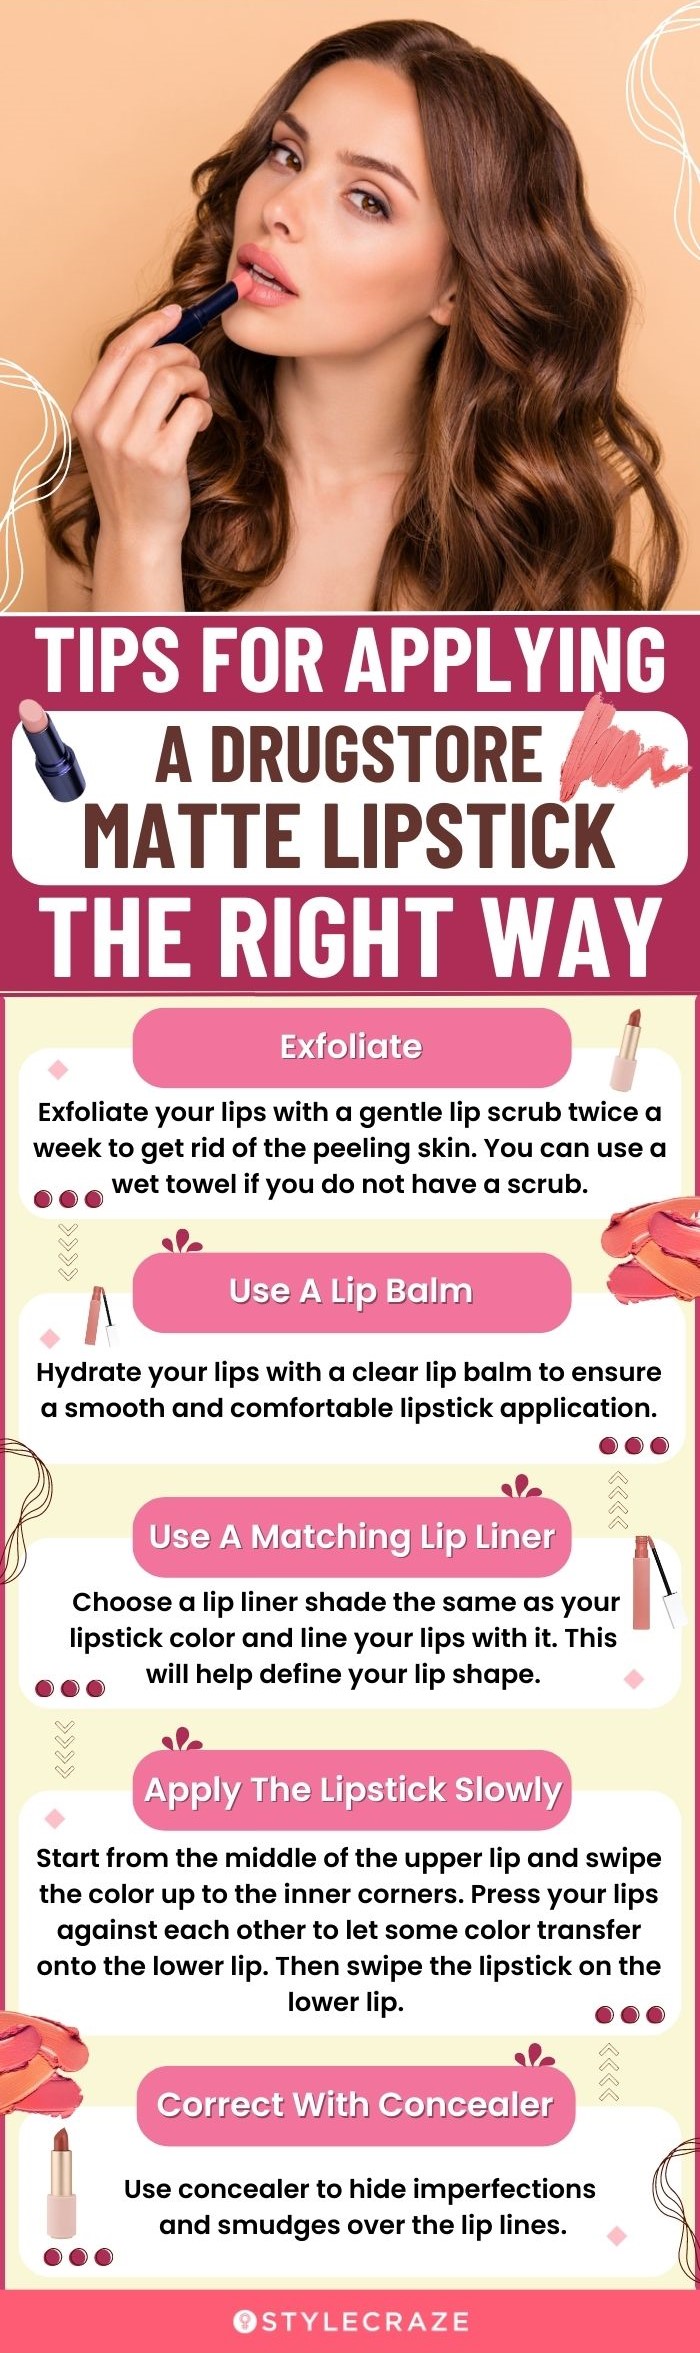 Tips For Applying A Drugstore Matte Lipstick The Right Way (infographic)